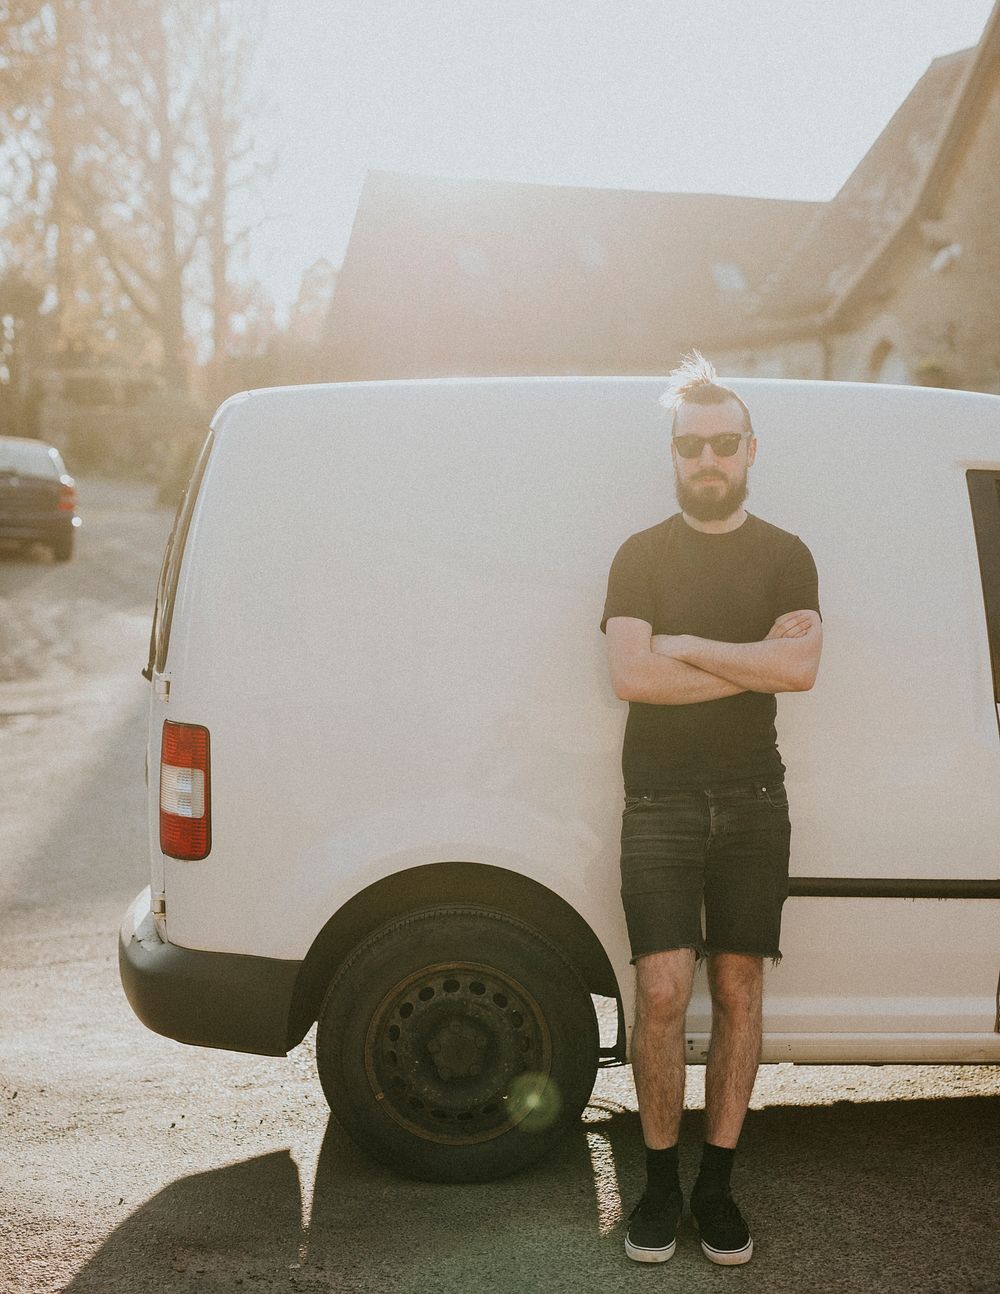 Delivery man with white van